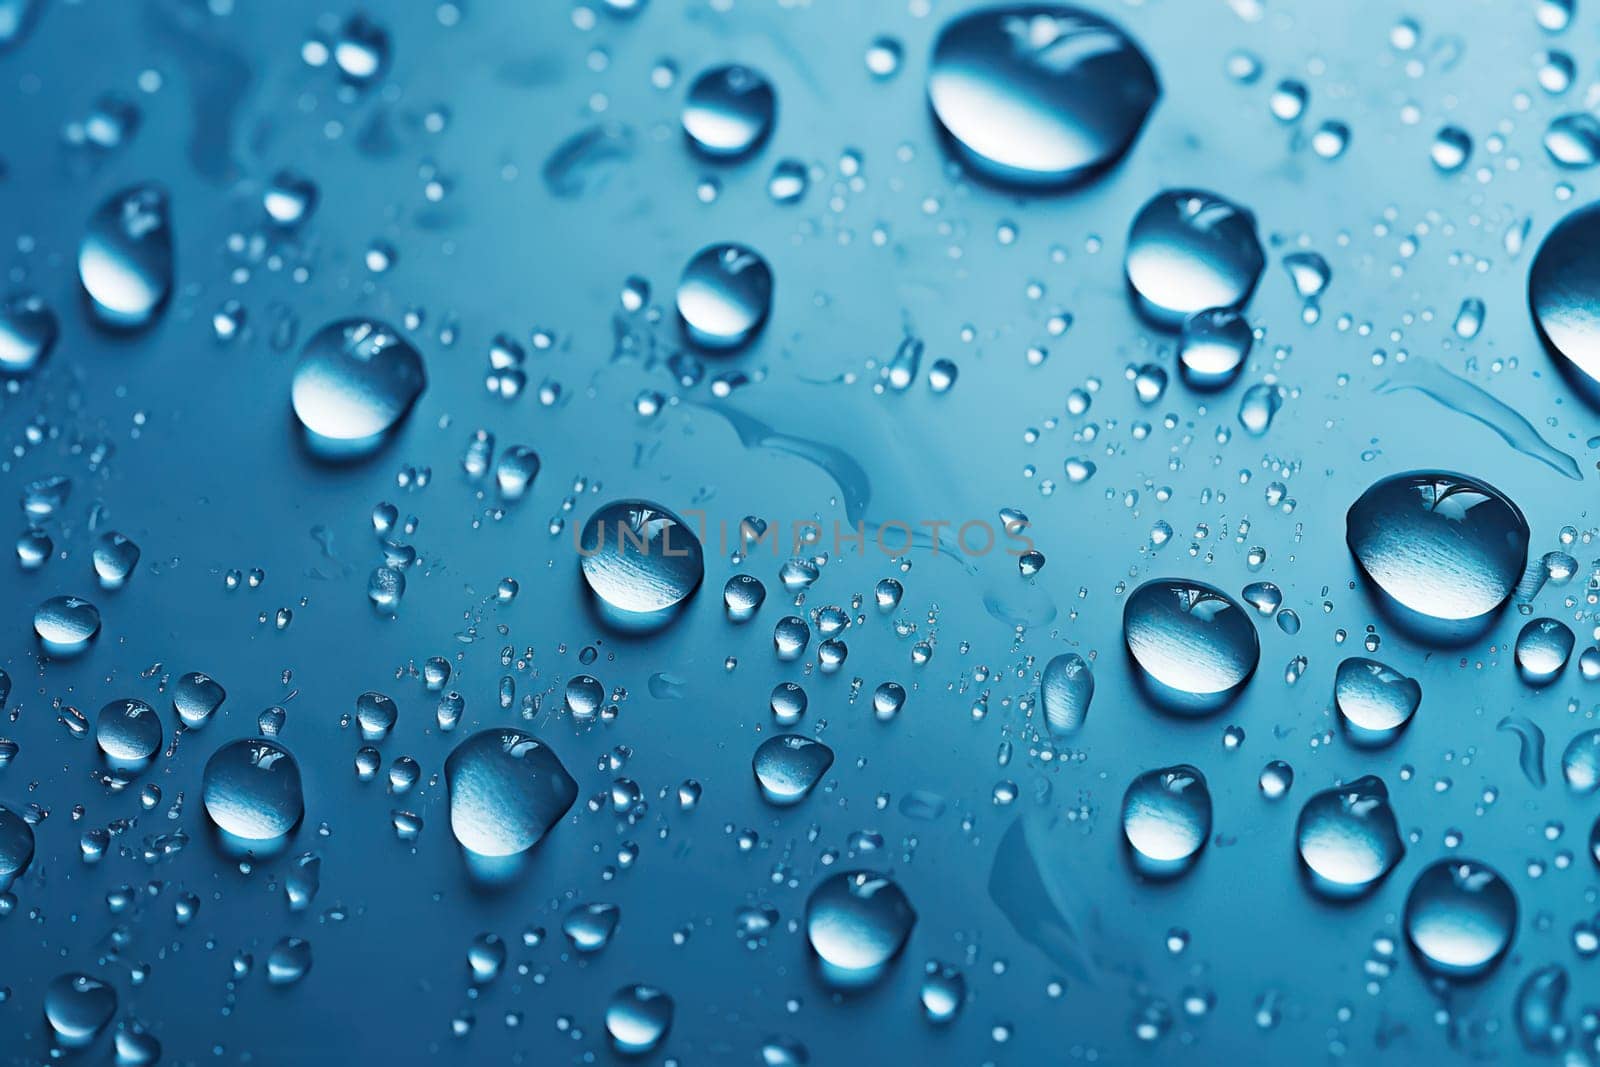 Refreshing Raindrop: A Bright, Pure Sphere of Cool Blue Rainwater on a Smooth, Clean Glass Surface with Abstract Patterns and Transparent Texture, Creating a Fresh and Relaxing Environment by Vichizh